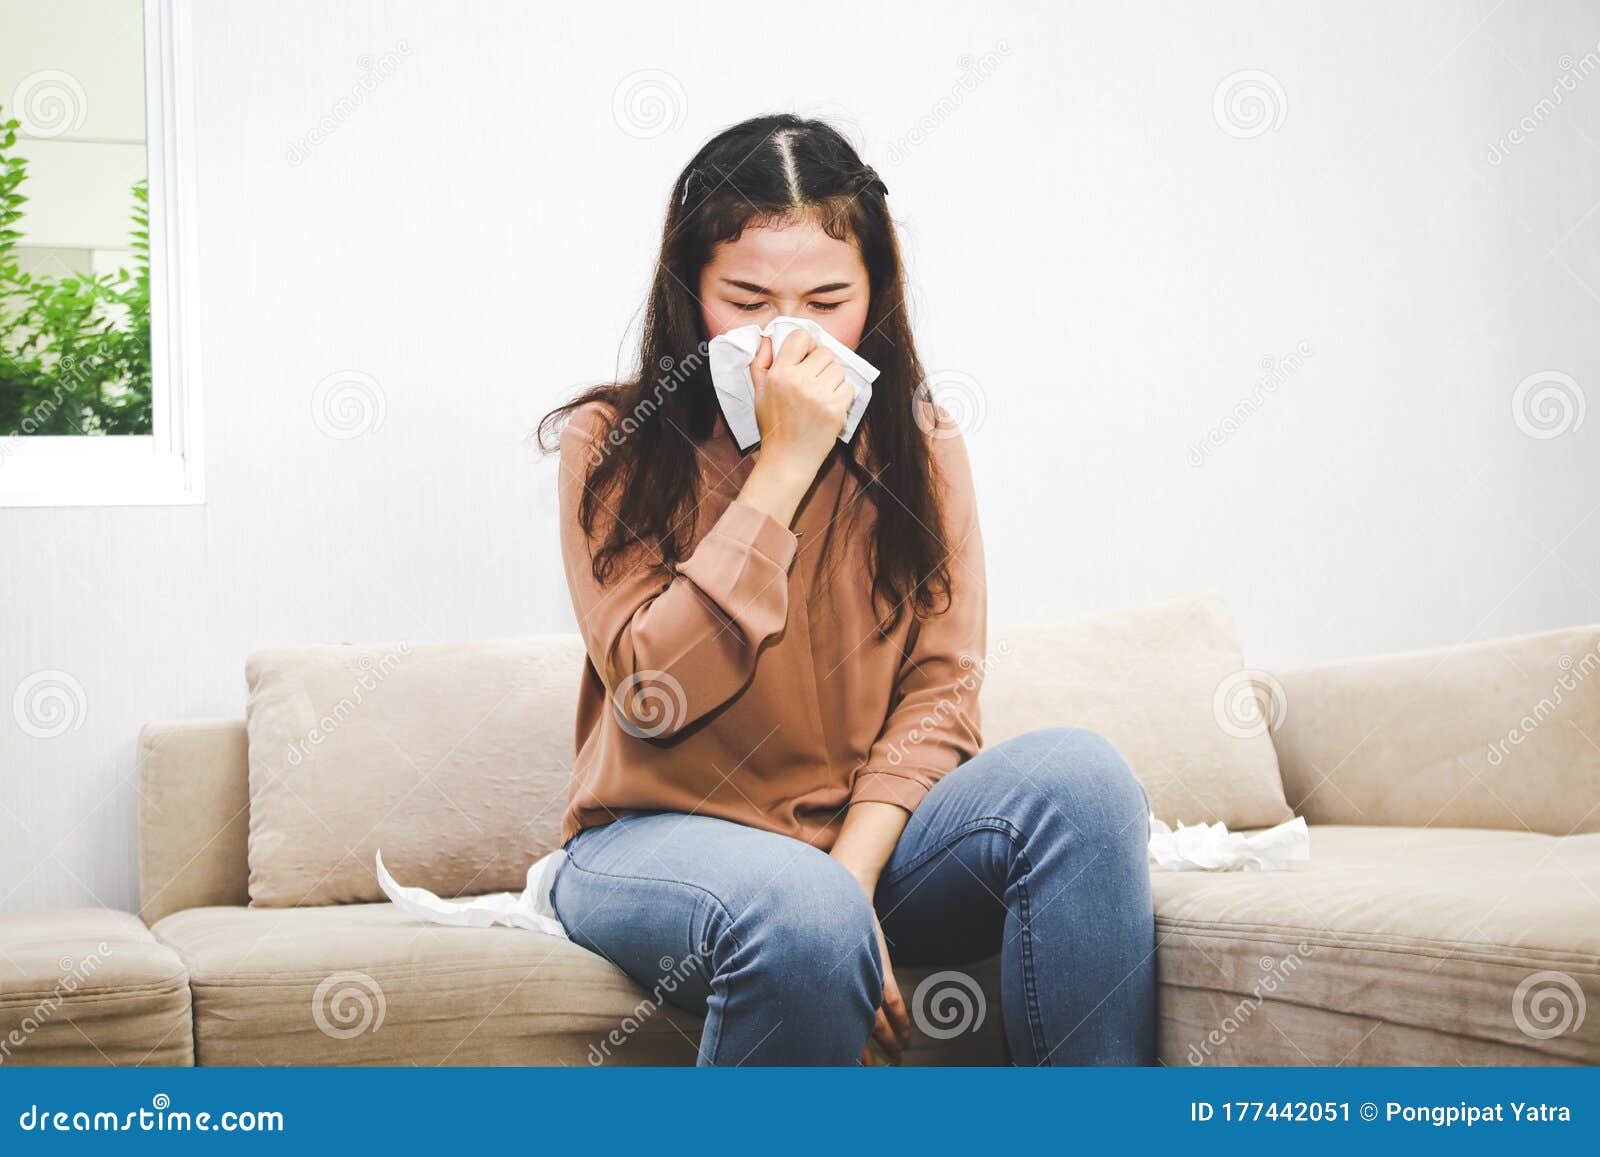 An Asian Woman Has A Headache And A Runny Nose Sitting On The Sofa In 